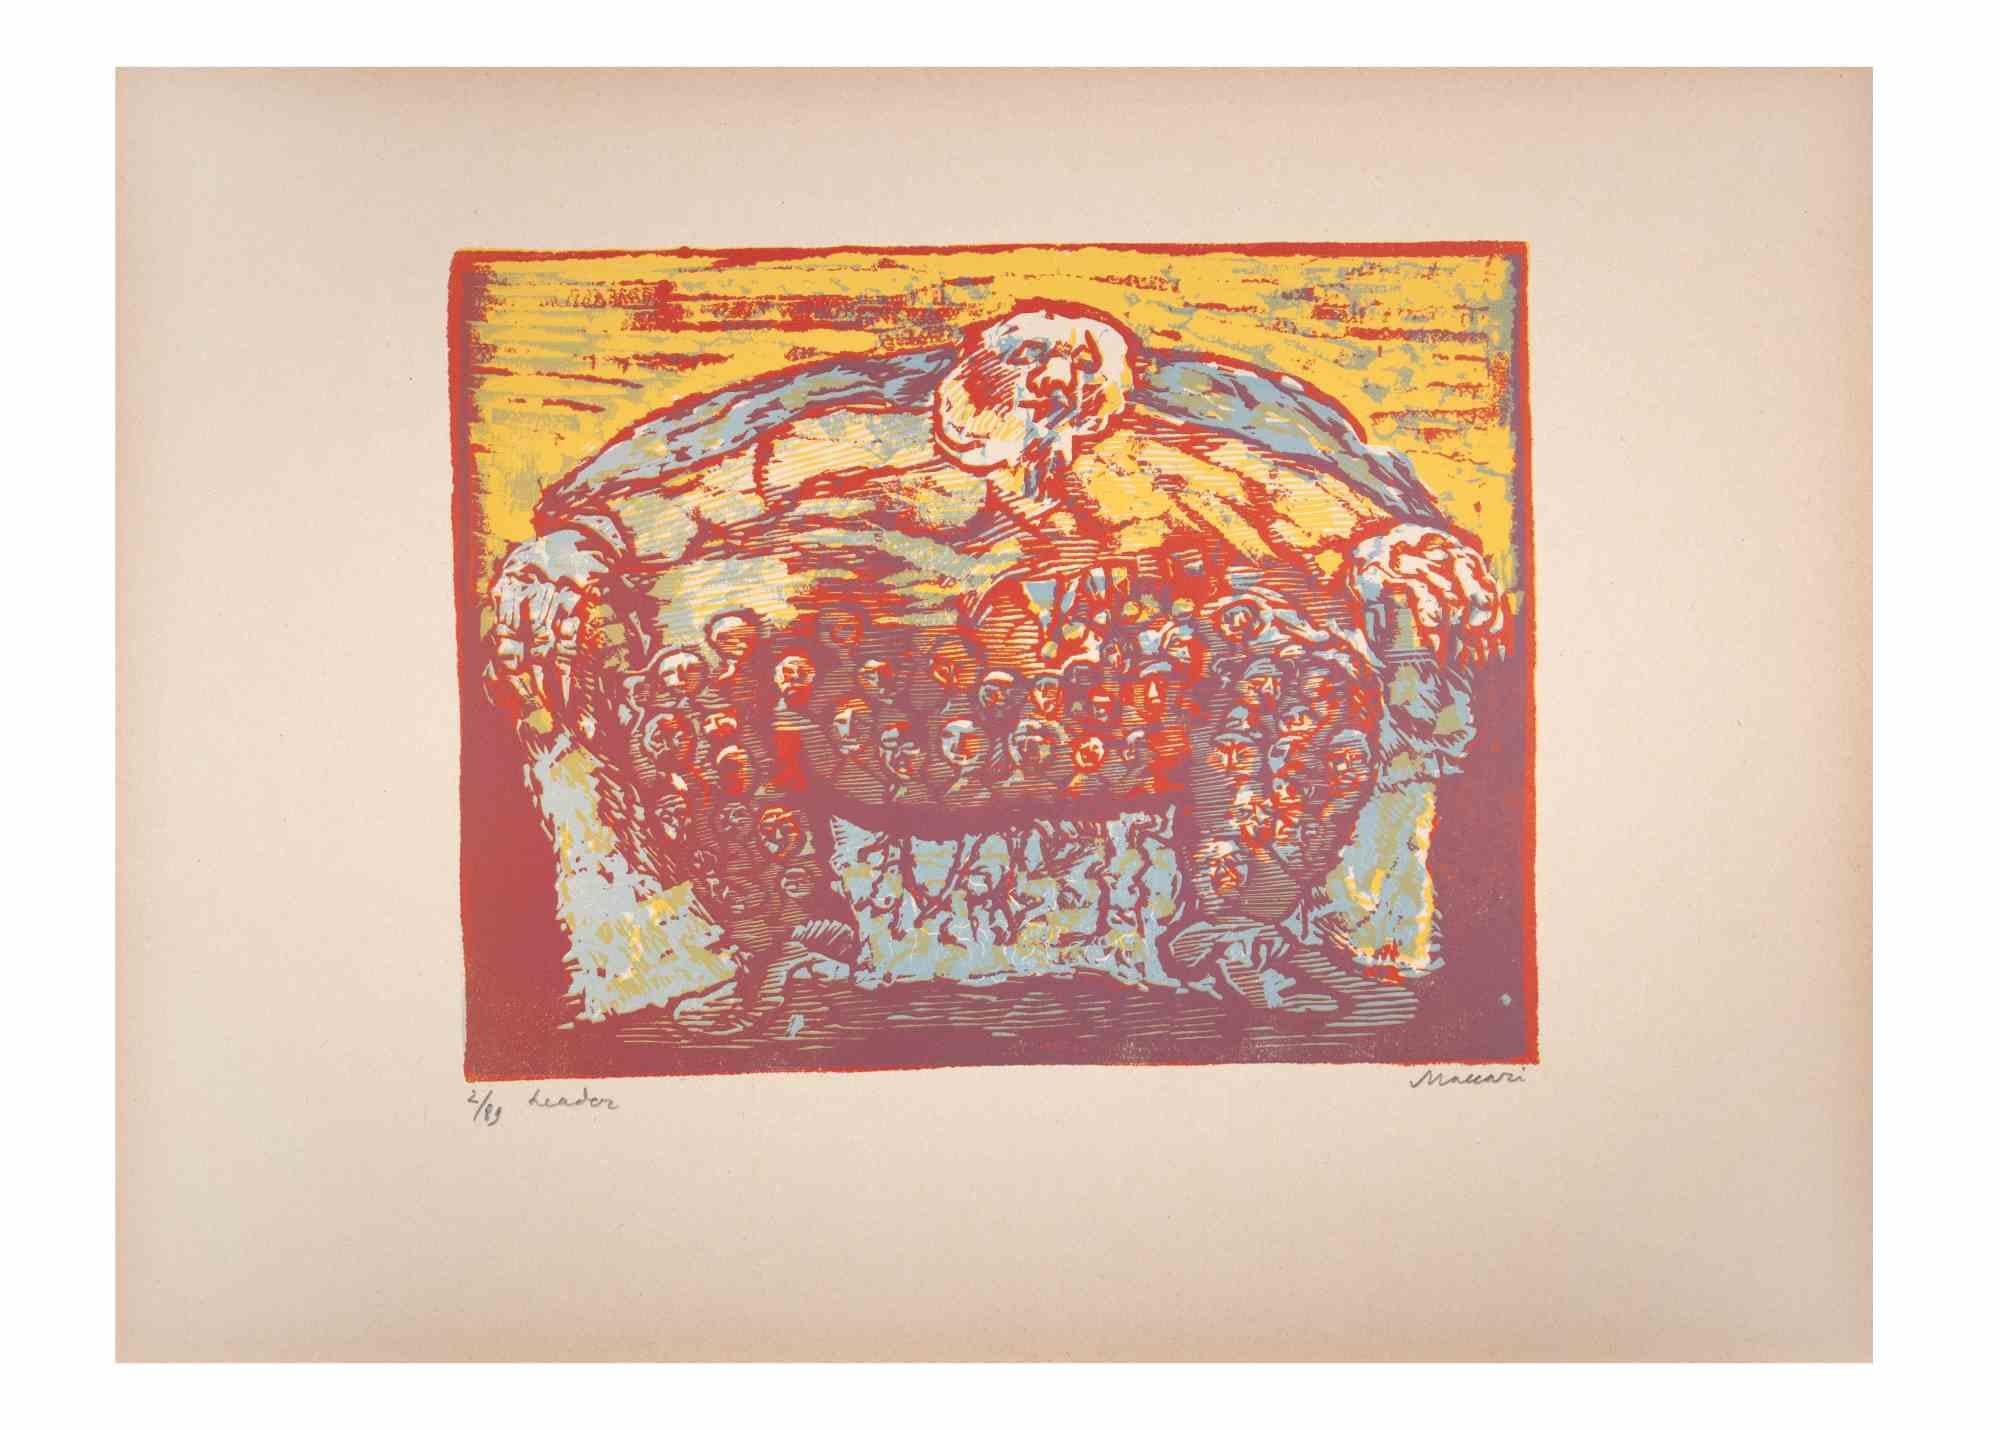 Leader is an Artwork realized by Mino Maccari  (1924-1989) in the Mid-20th Century.

Colored woodcut on paper. Hand-signed on the lower, numbered 2/89 specimens and titled on the left margin.

Good conditions.

Mino Maccari (Siena, 1924-Rome, June